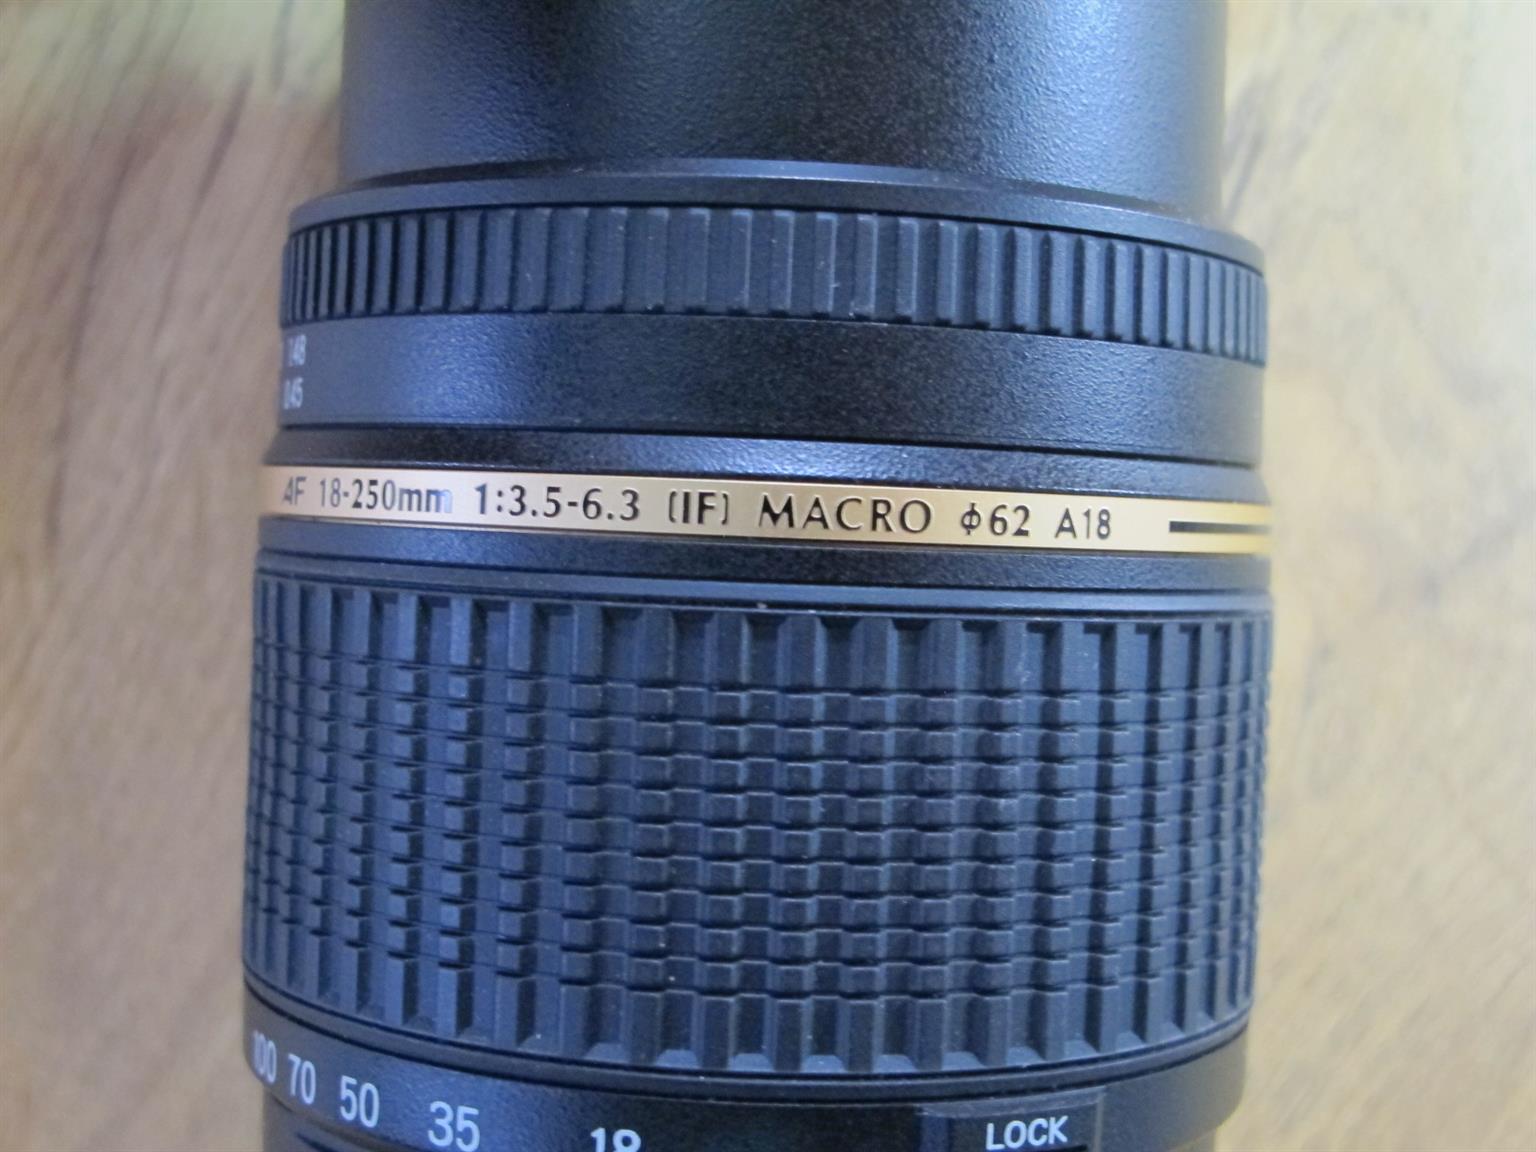 Tamron Macro Zoom Lens AF 18-250mm F/3.5-6.3 Di-II LD Aspherical (IF) for Canon 